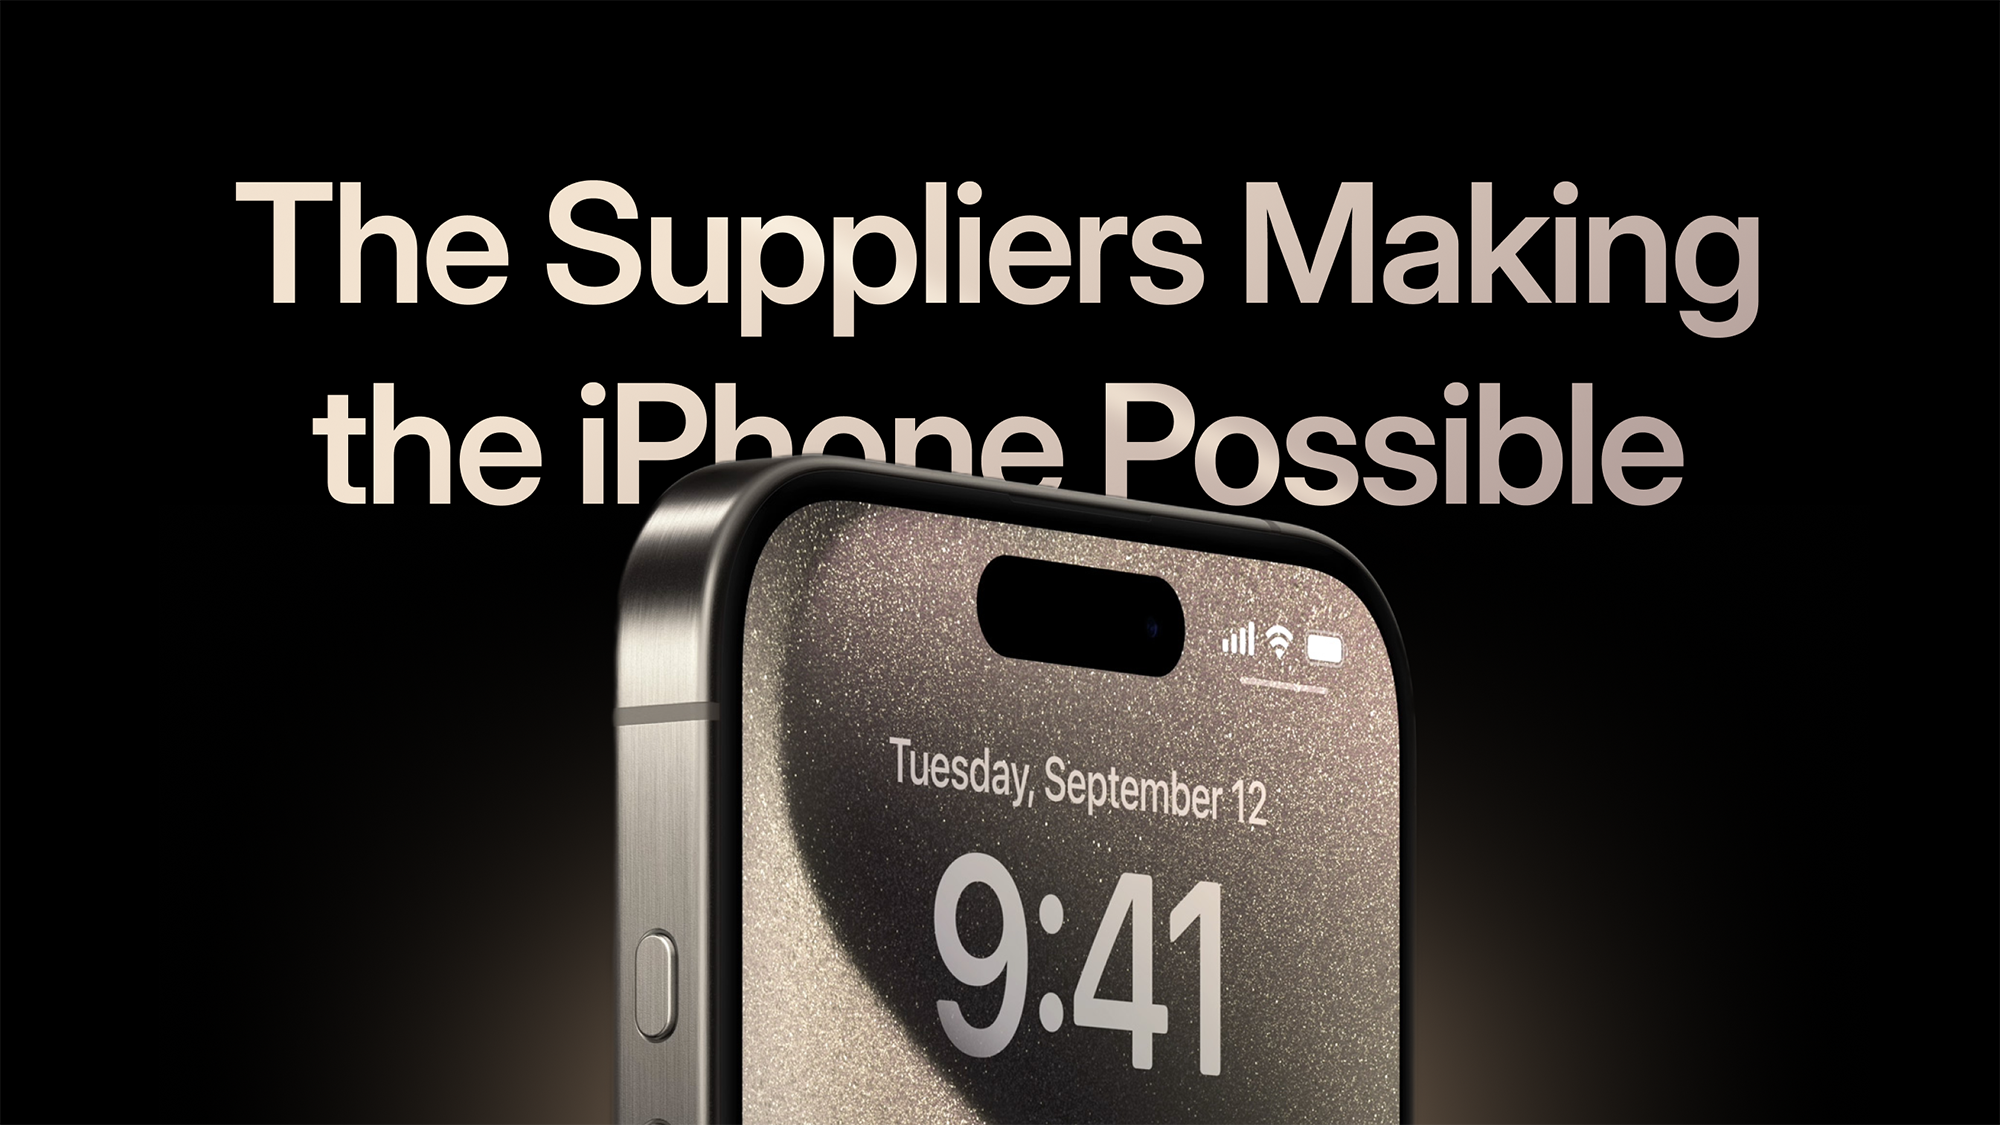 The suppliers making the iPhone possible